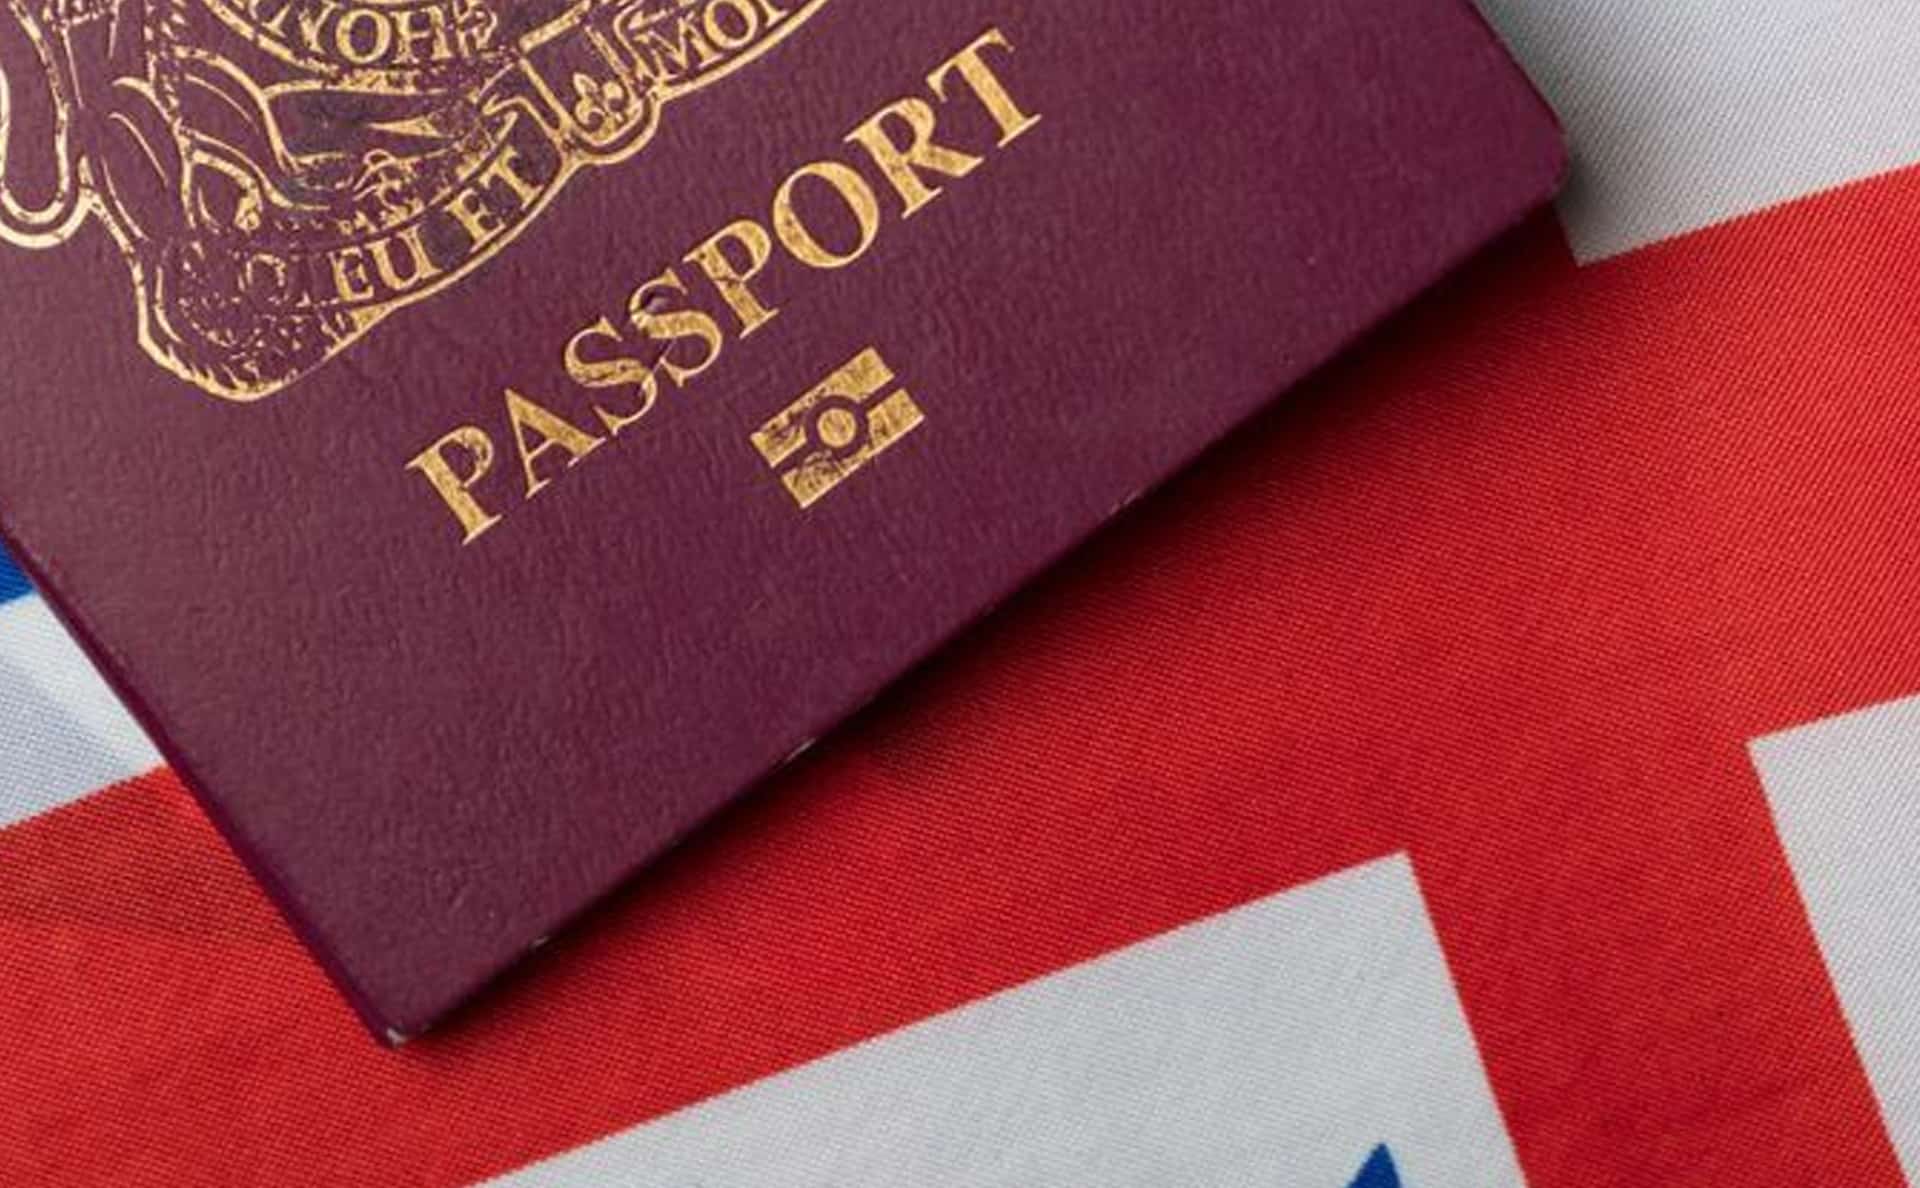 UK’s Marriage Visitor Visa: Here are all the details to apply